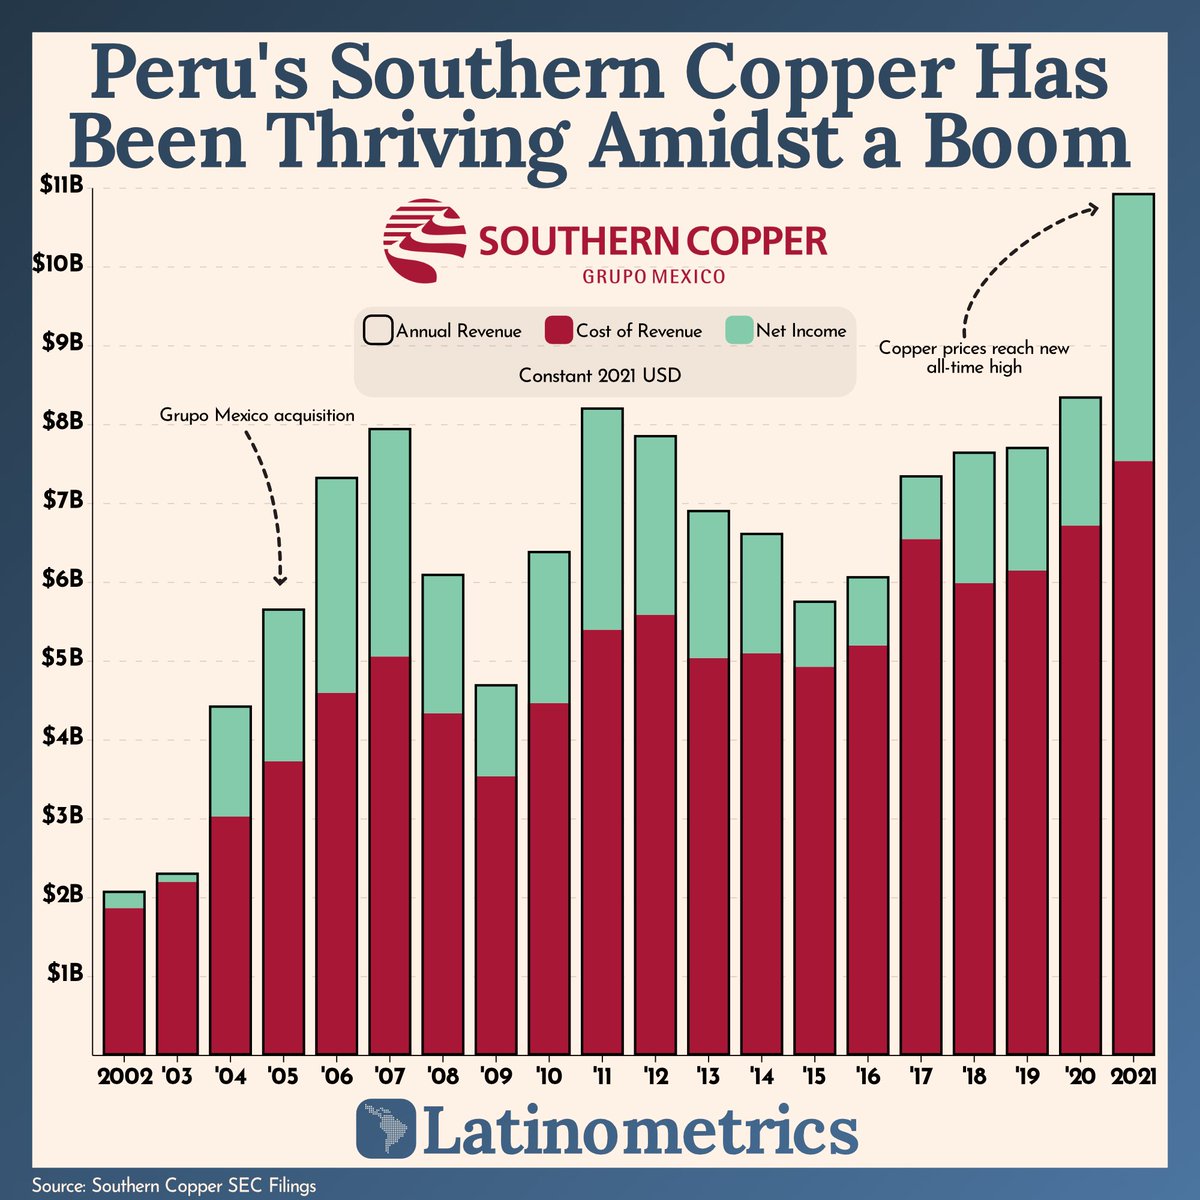 (1/6) Peruvian Southern Copper is one of the world's largest producers, now worth $36B+. A brief thread about copper: